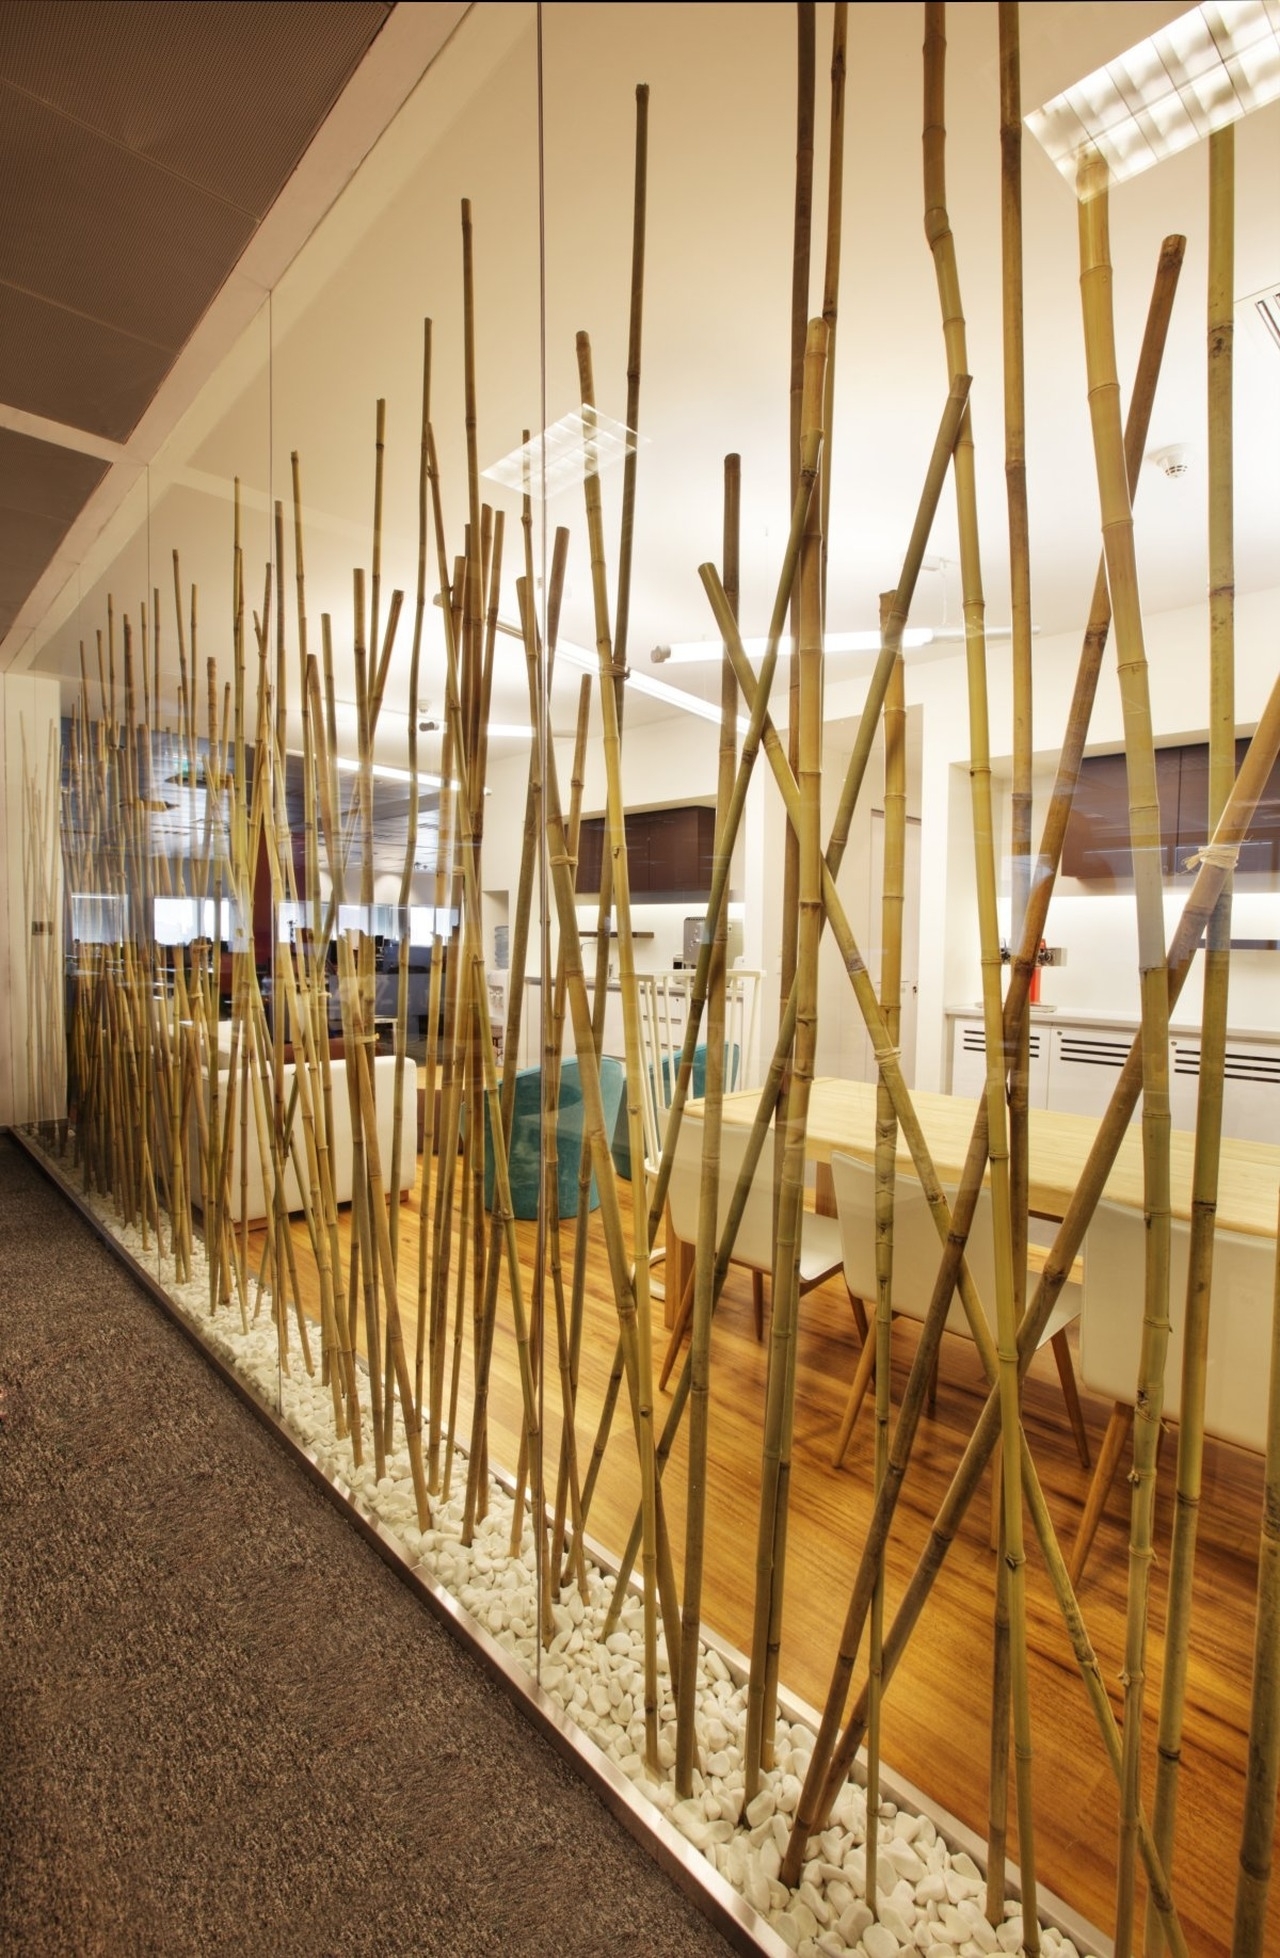 Bamboo partition divider